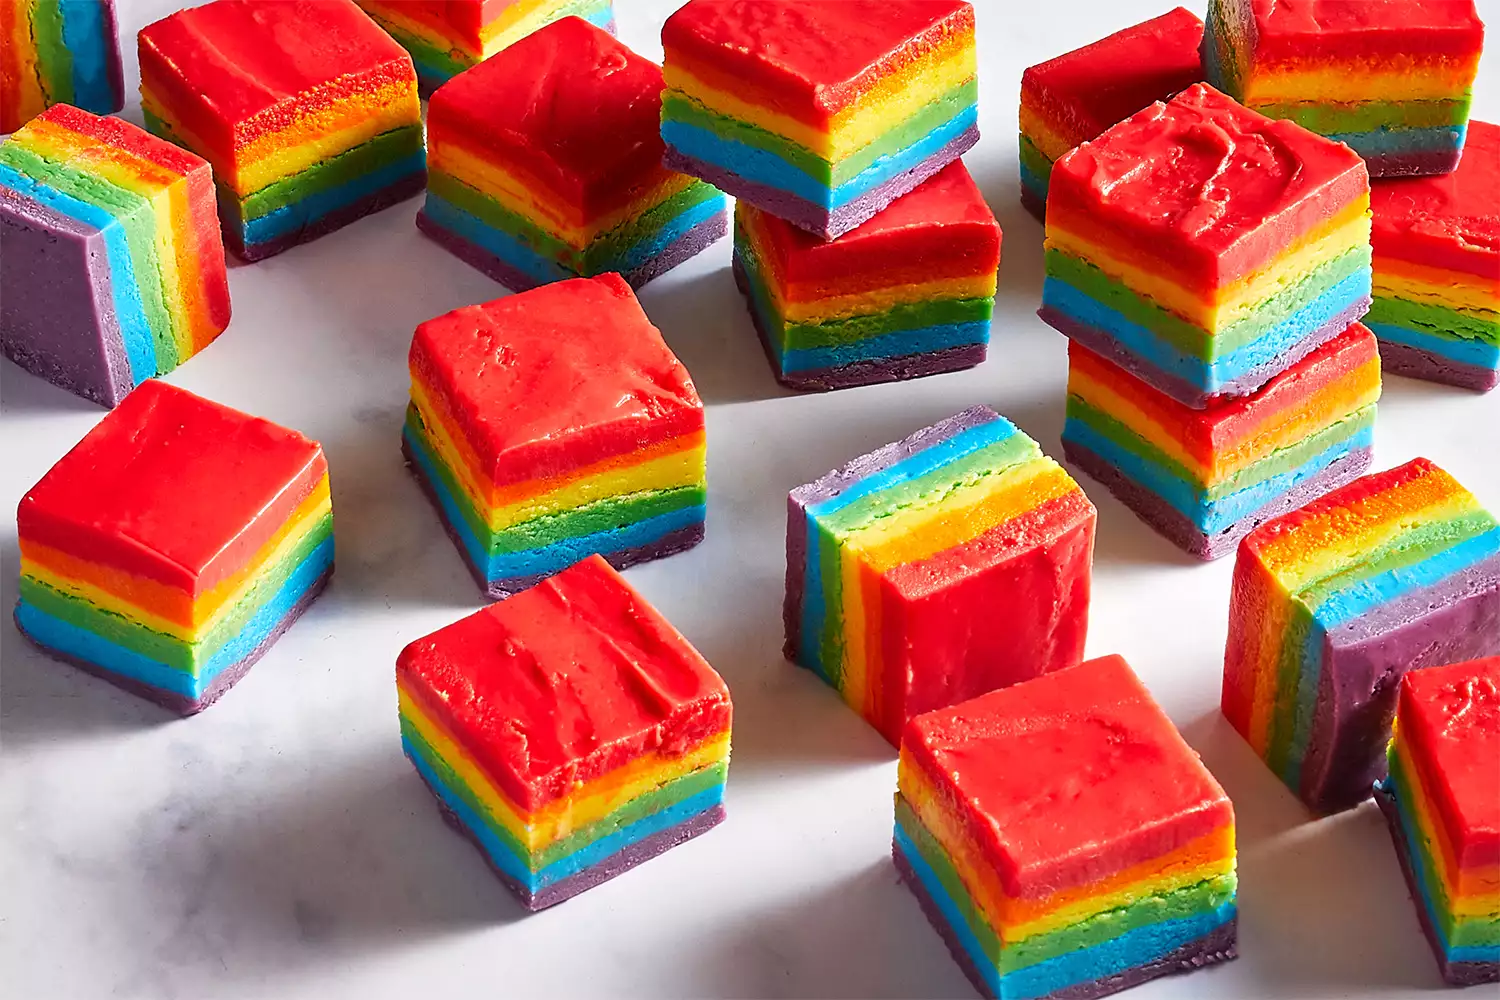 The Spruce Eats’ Rainbow White Chocolate Fudge - such a fun, colorful rainbow treat for St. Patrick's Day